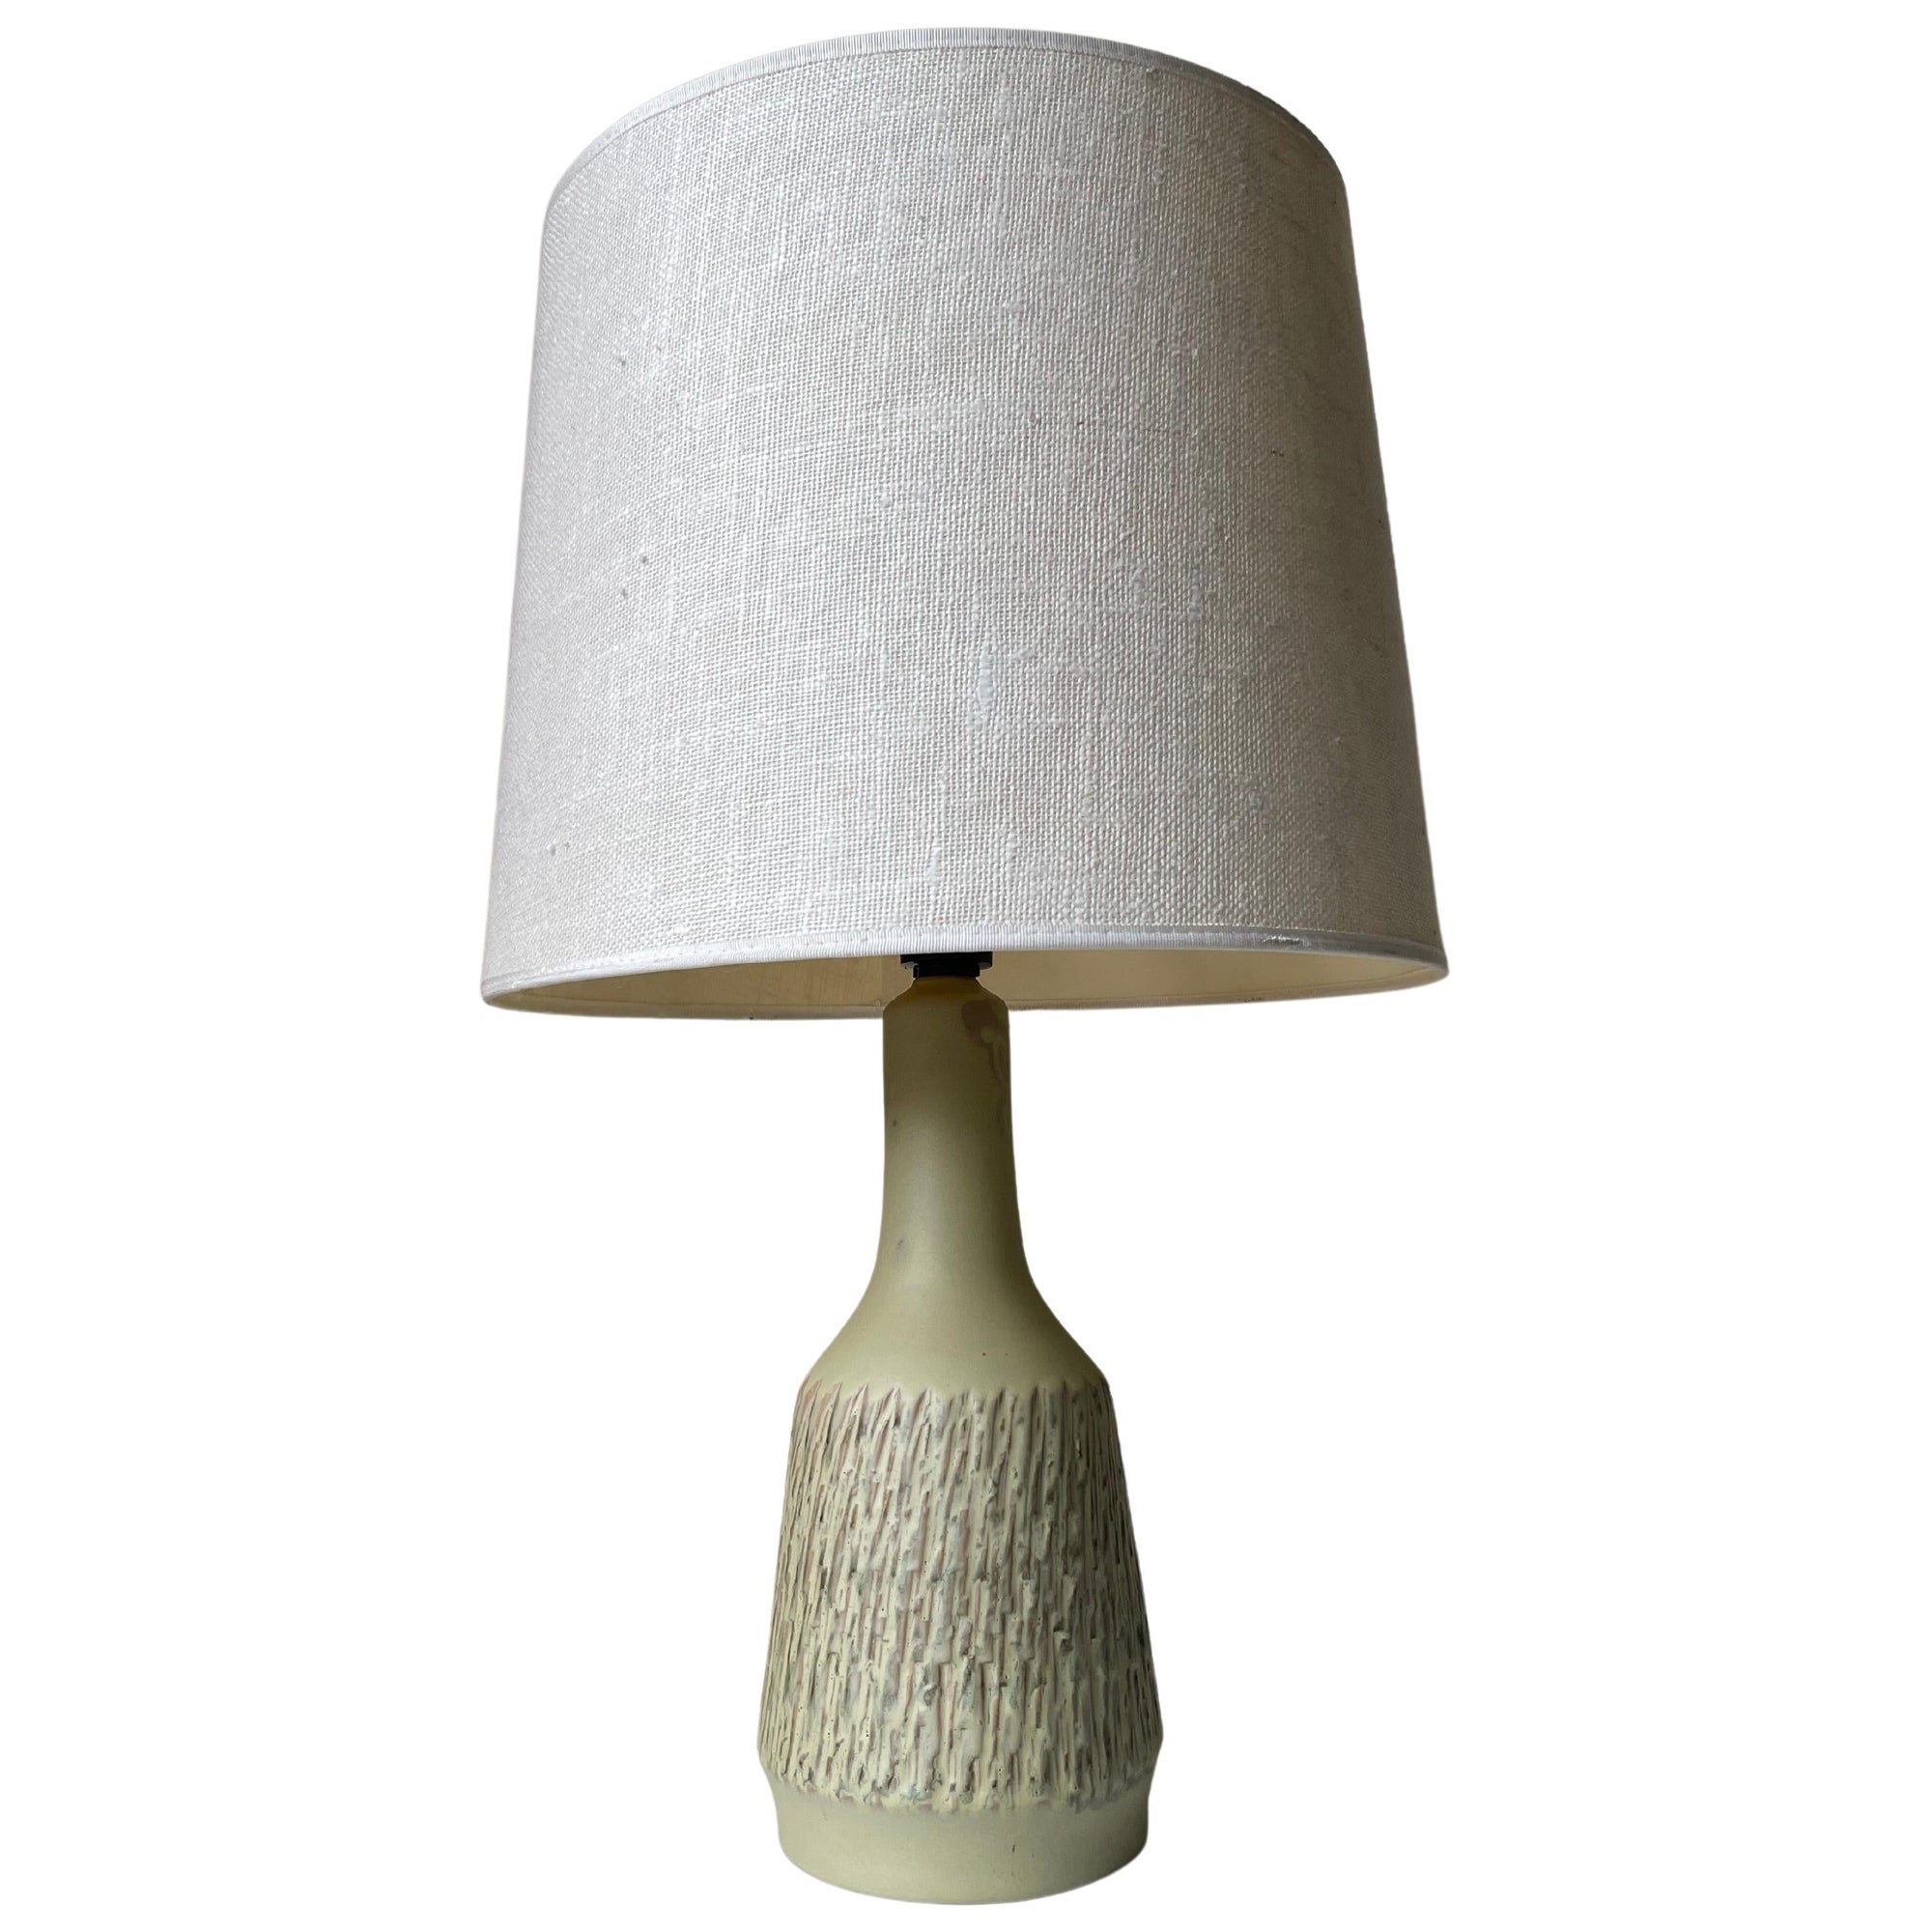 Light Green Textured Ceramic Table Lamp, 1960s For Sale